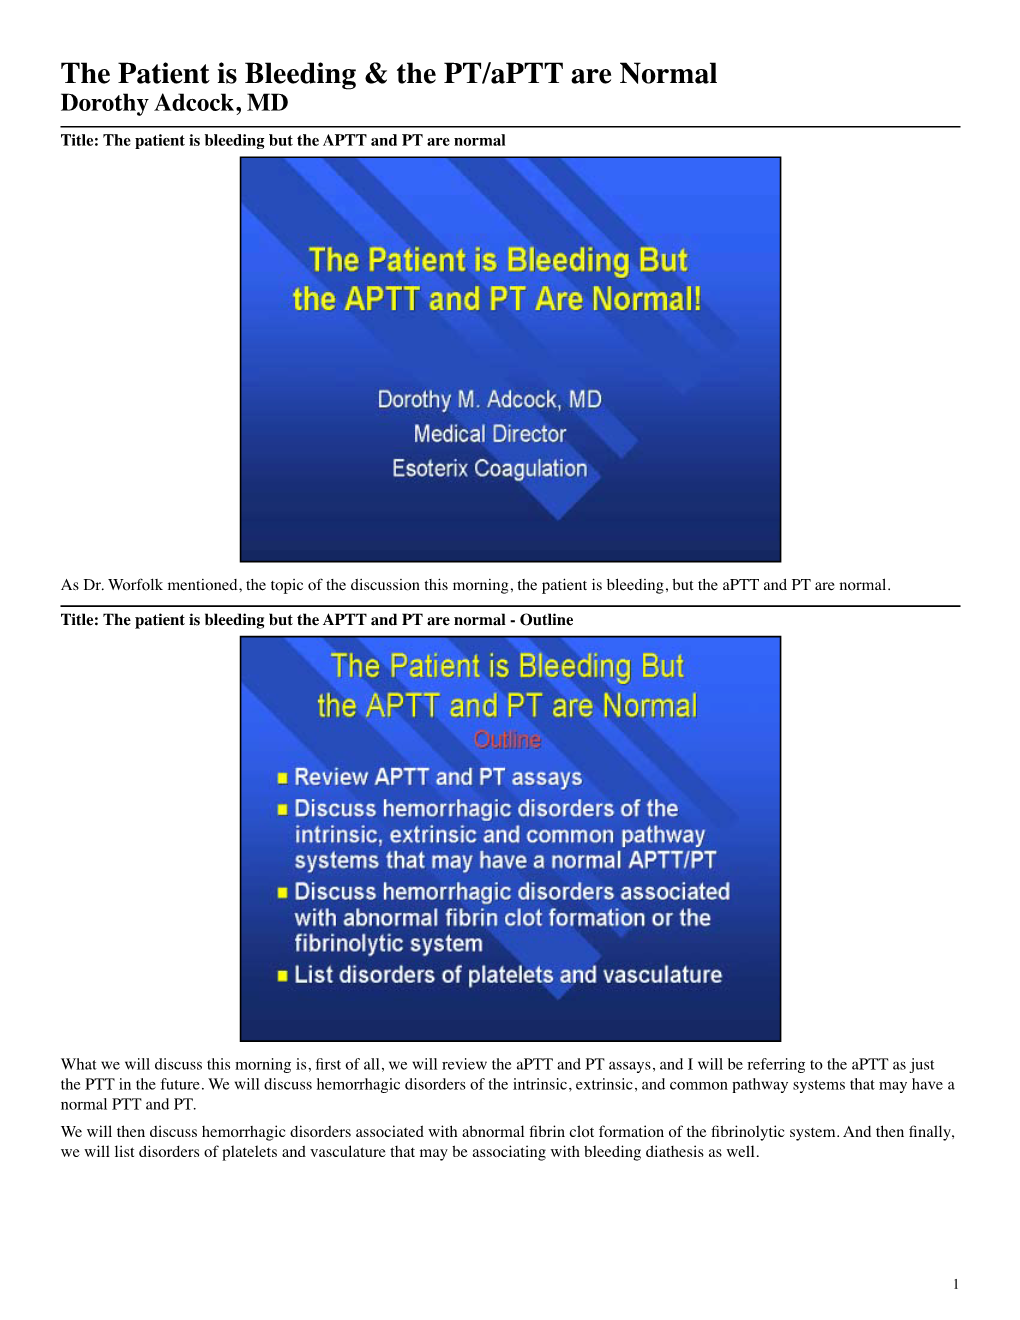 The Patient Is Bleeding & the PT/Aptt Are Normal